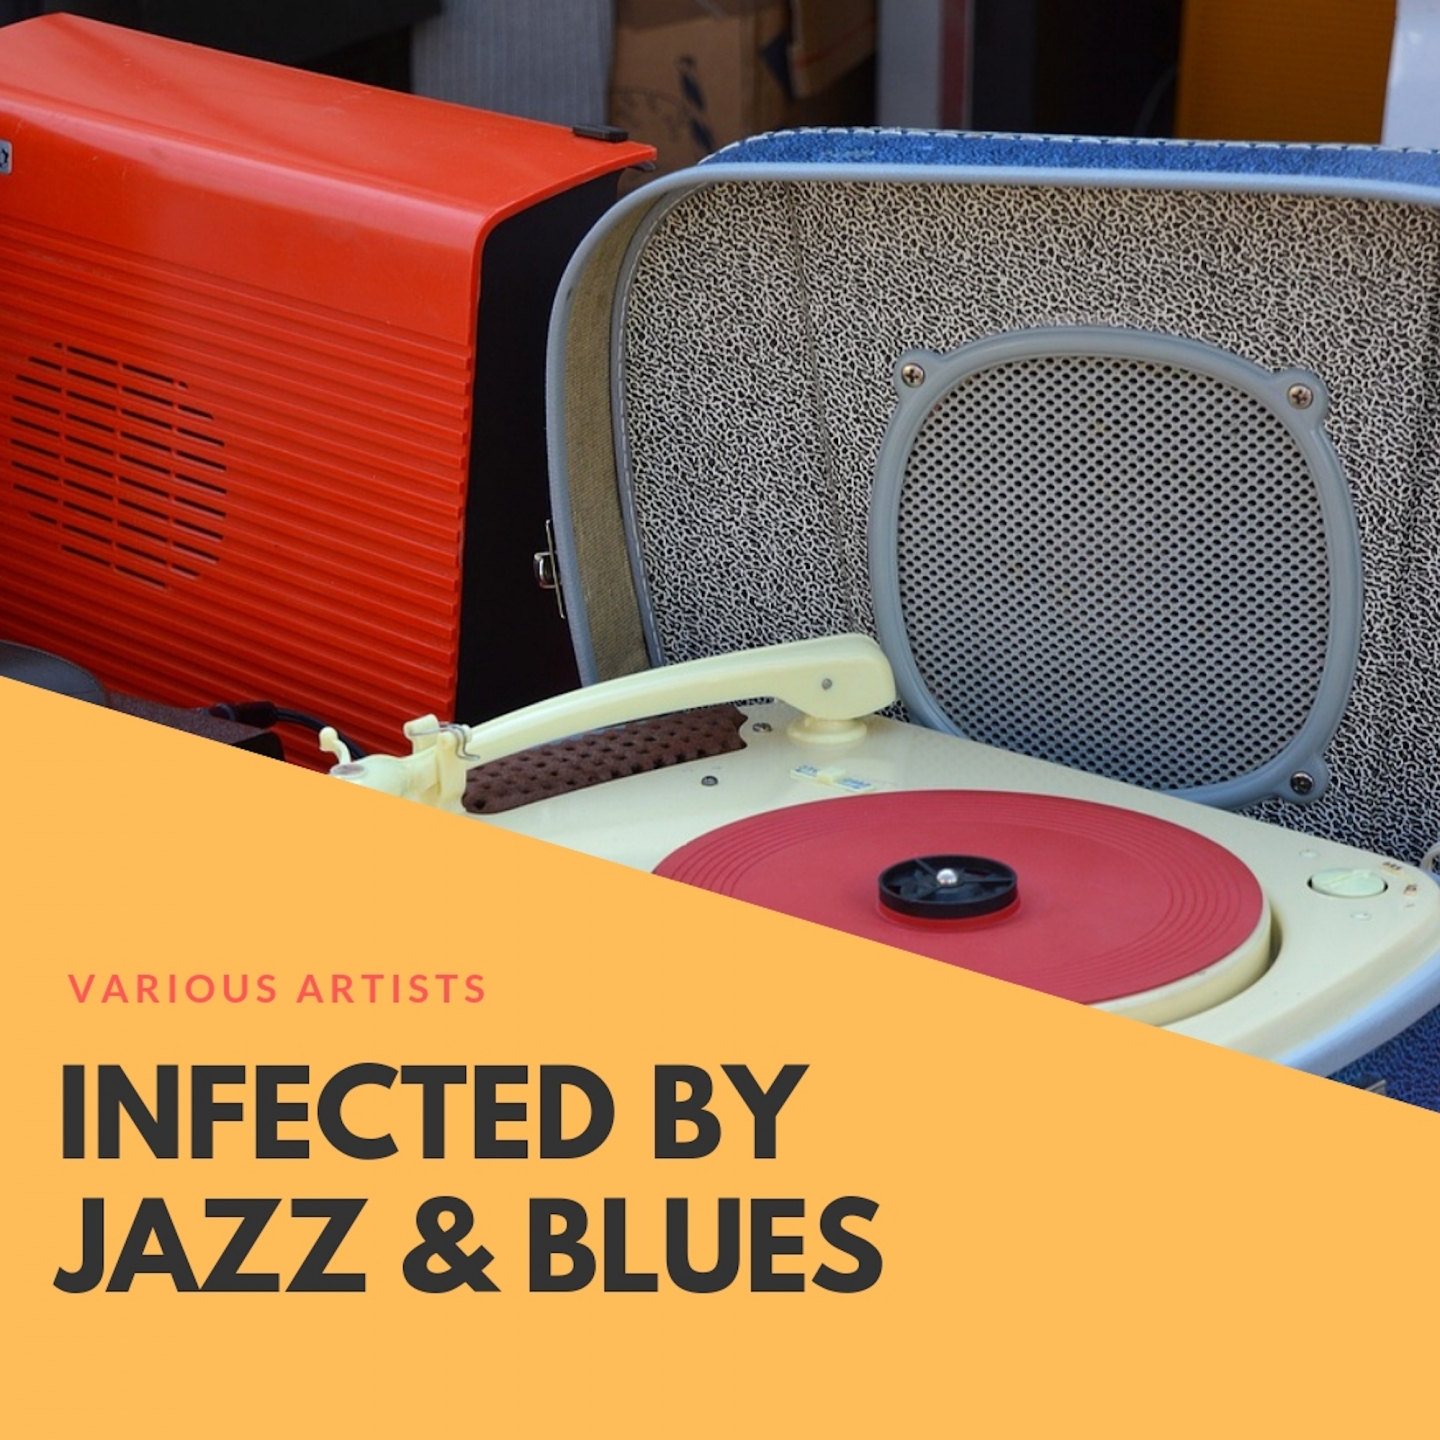 Infected by Jazz & Blues